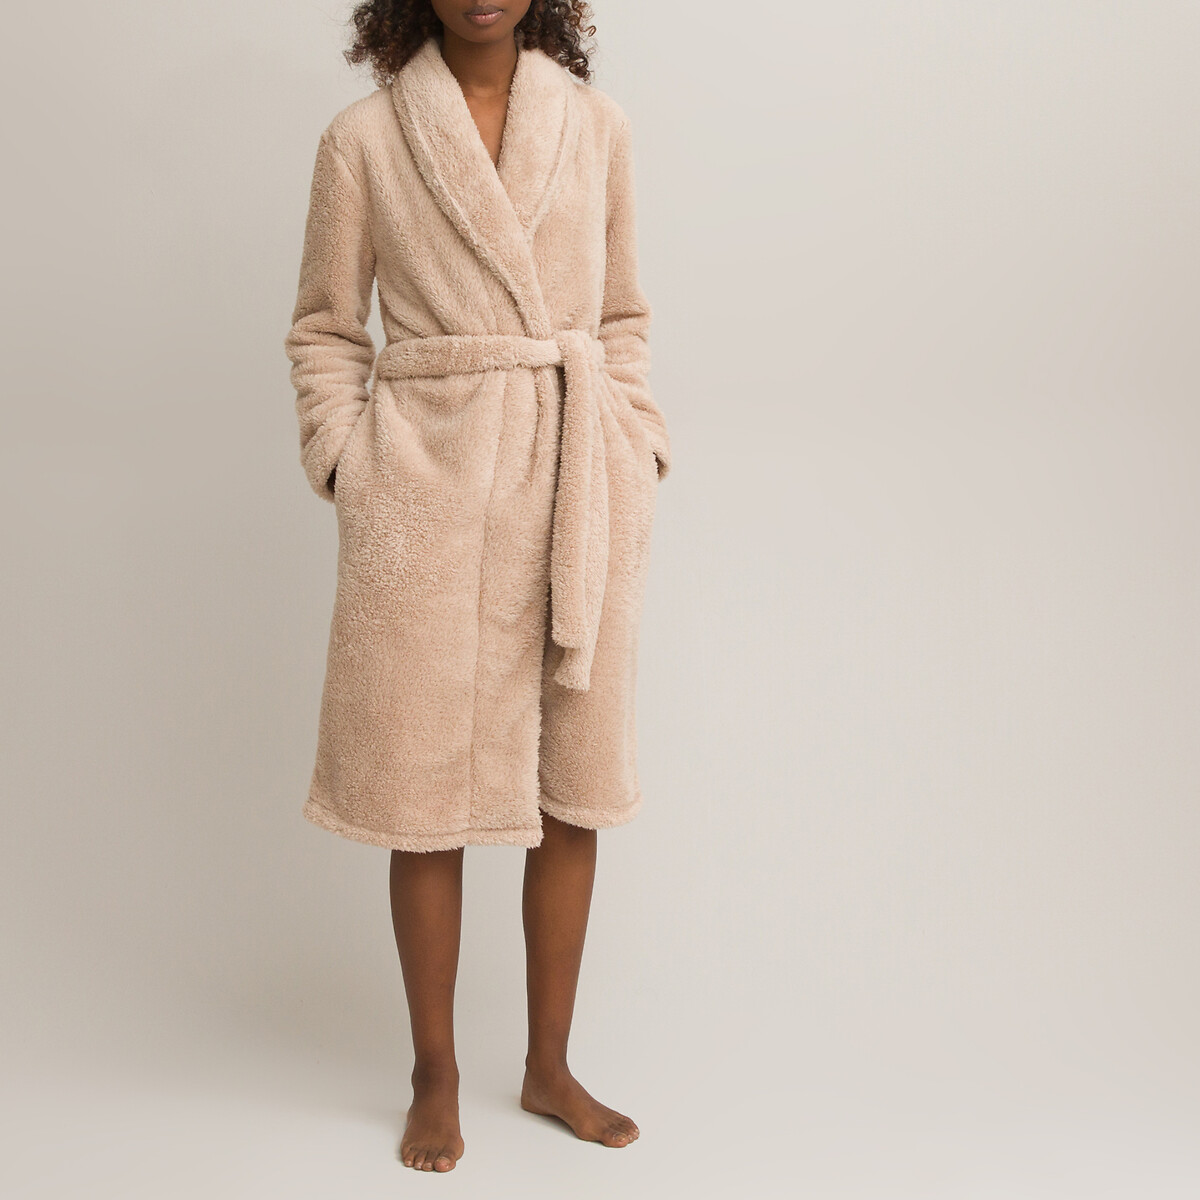 Details about   Forever Dreaming Ladies Borg Fleece Hooded Dressing Gown 